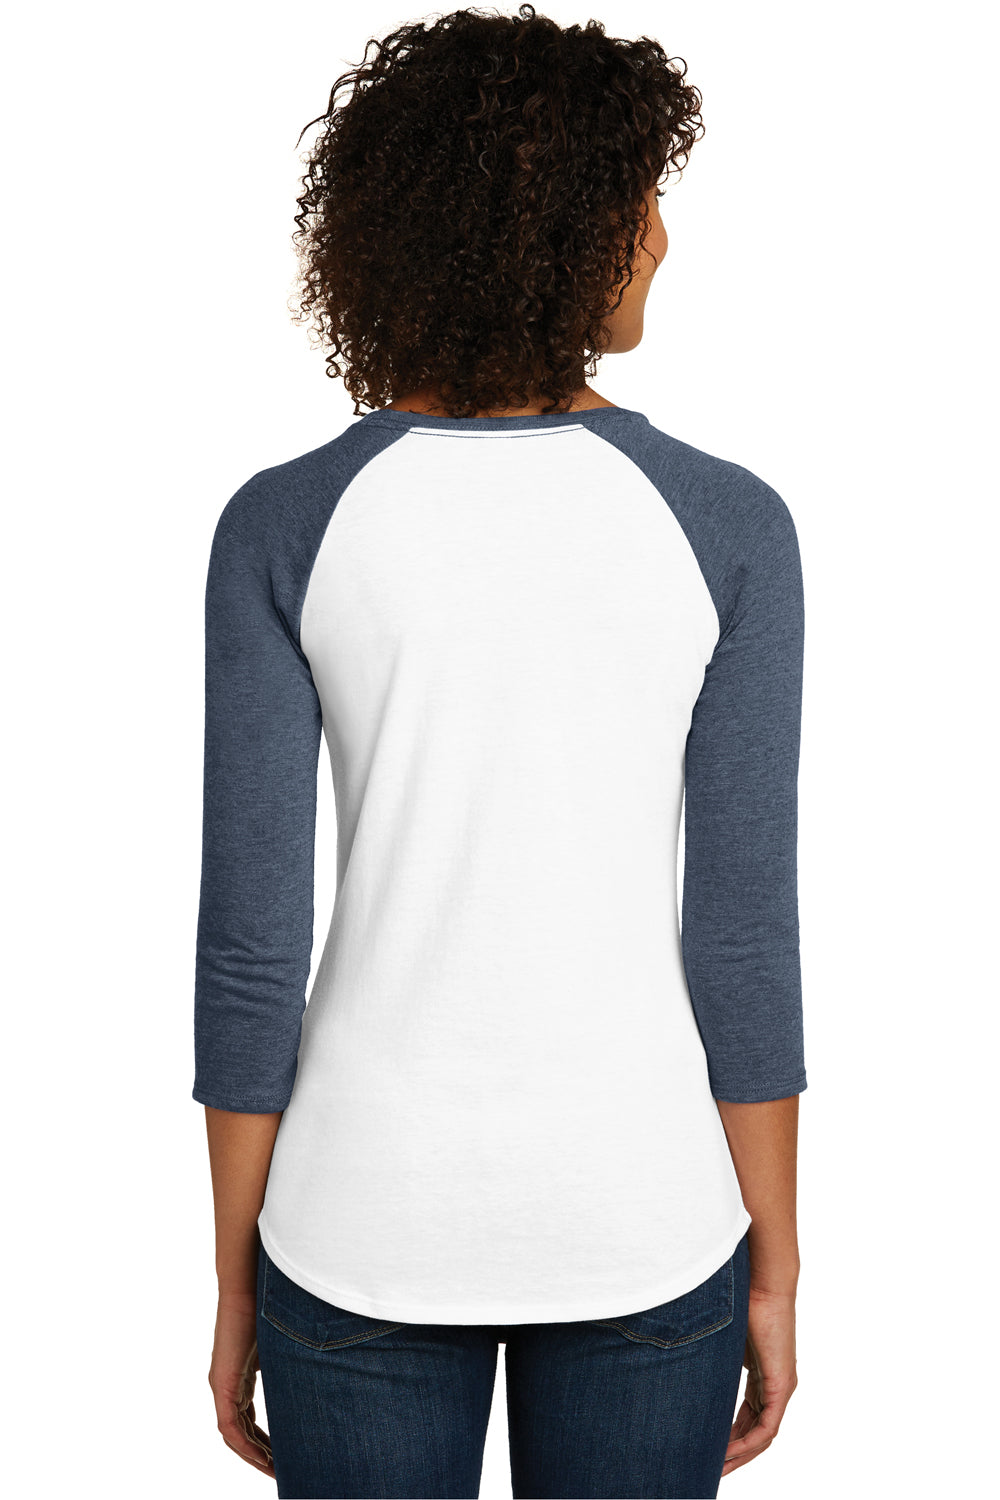 District DT6211 Womens Very Important 3/4 Sleeve Crewneck T-Shirt White/Heather Navy Blue Back